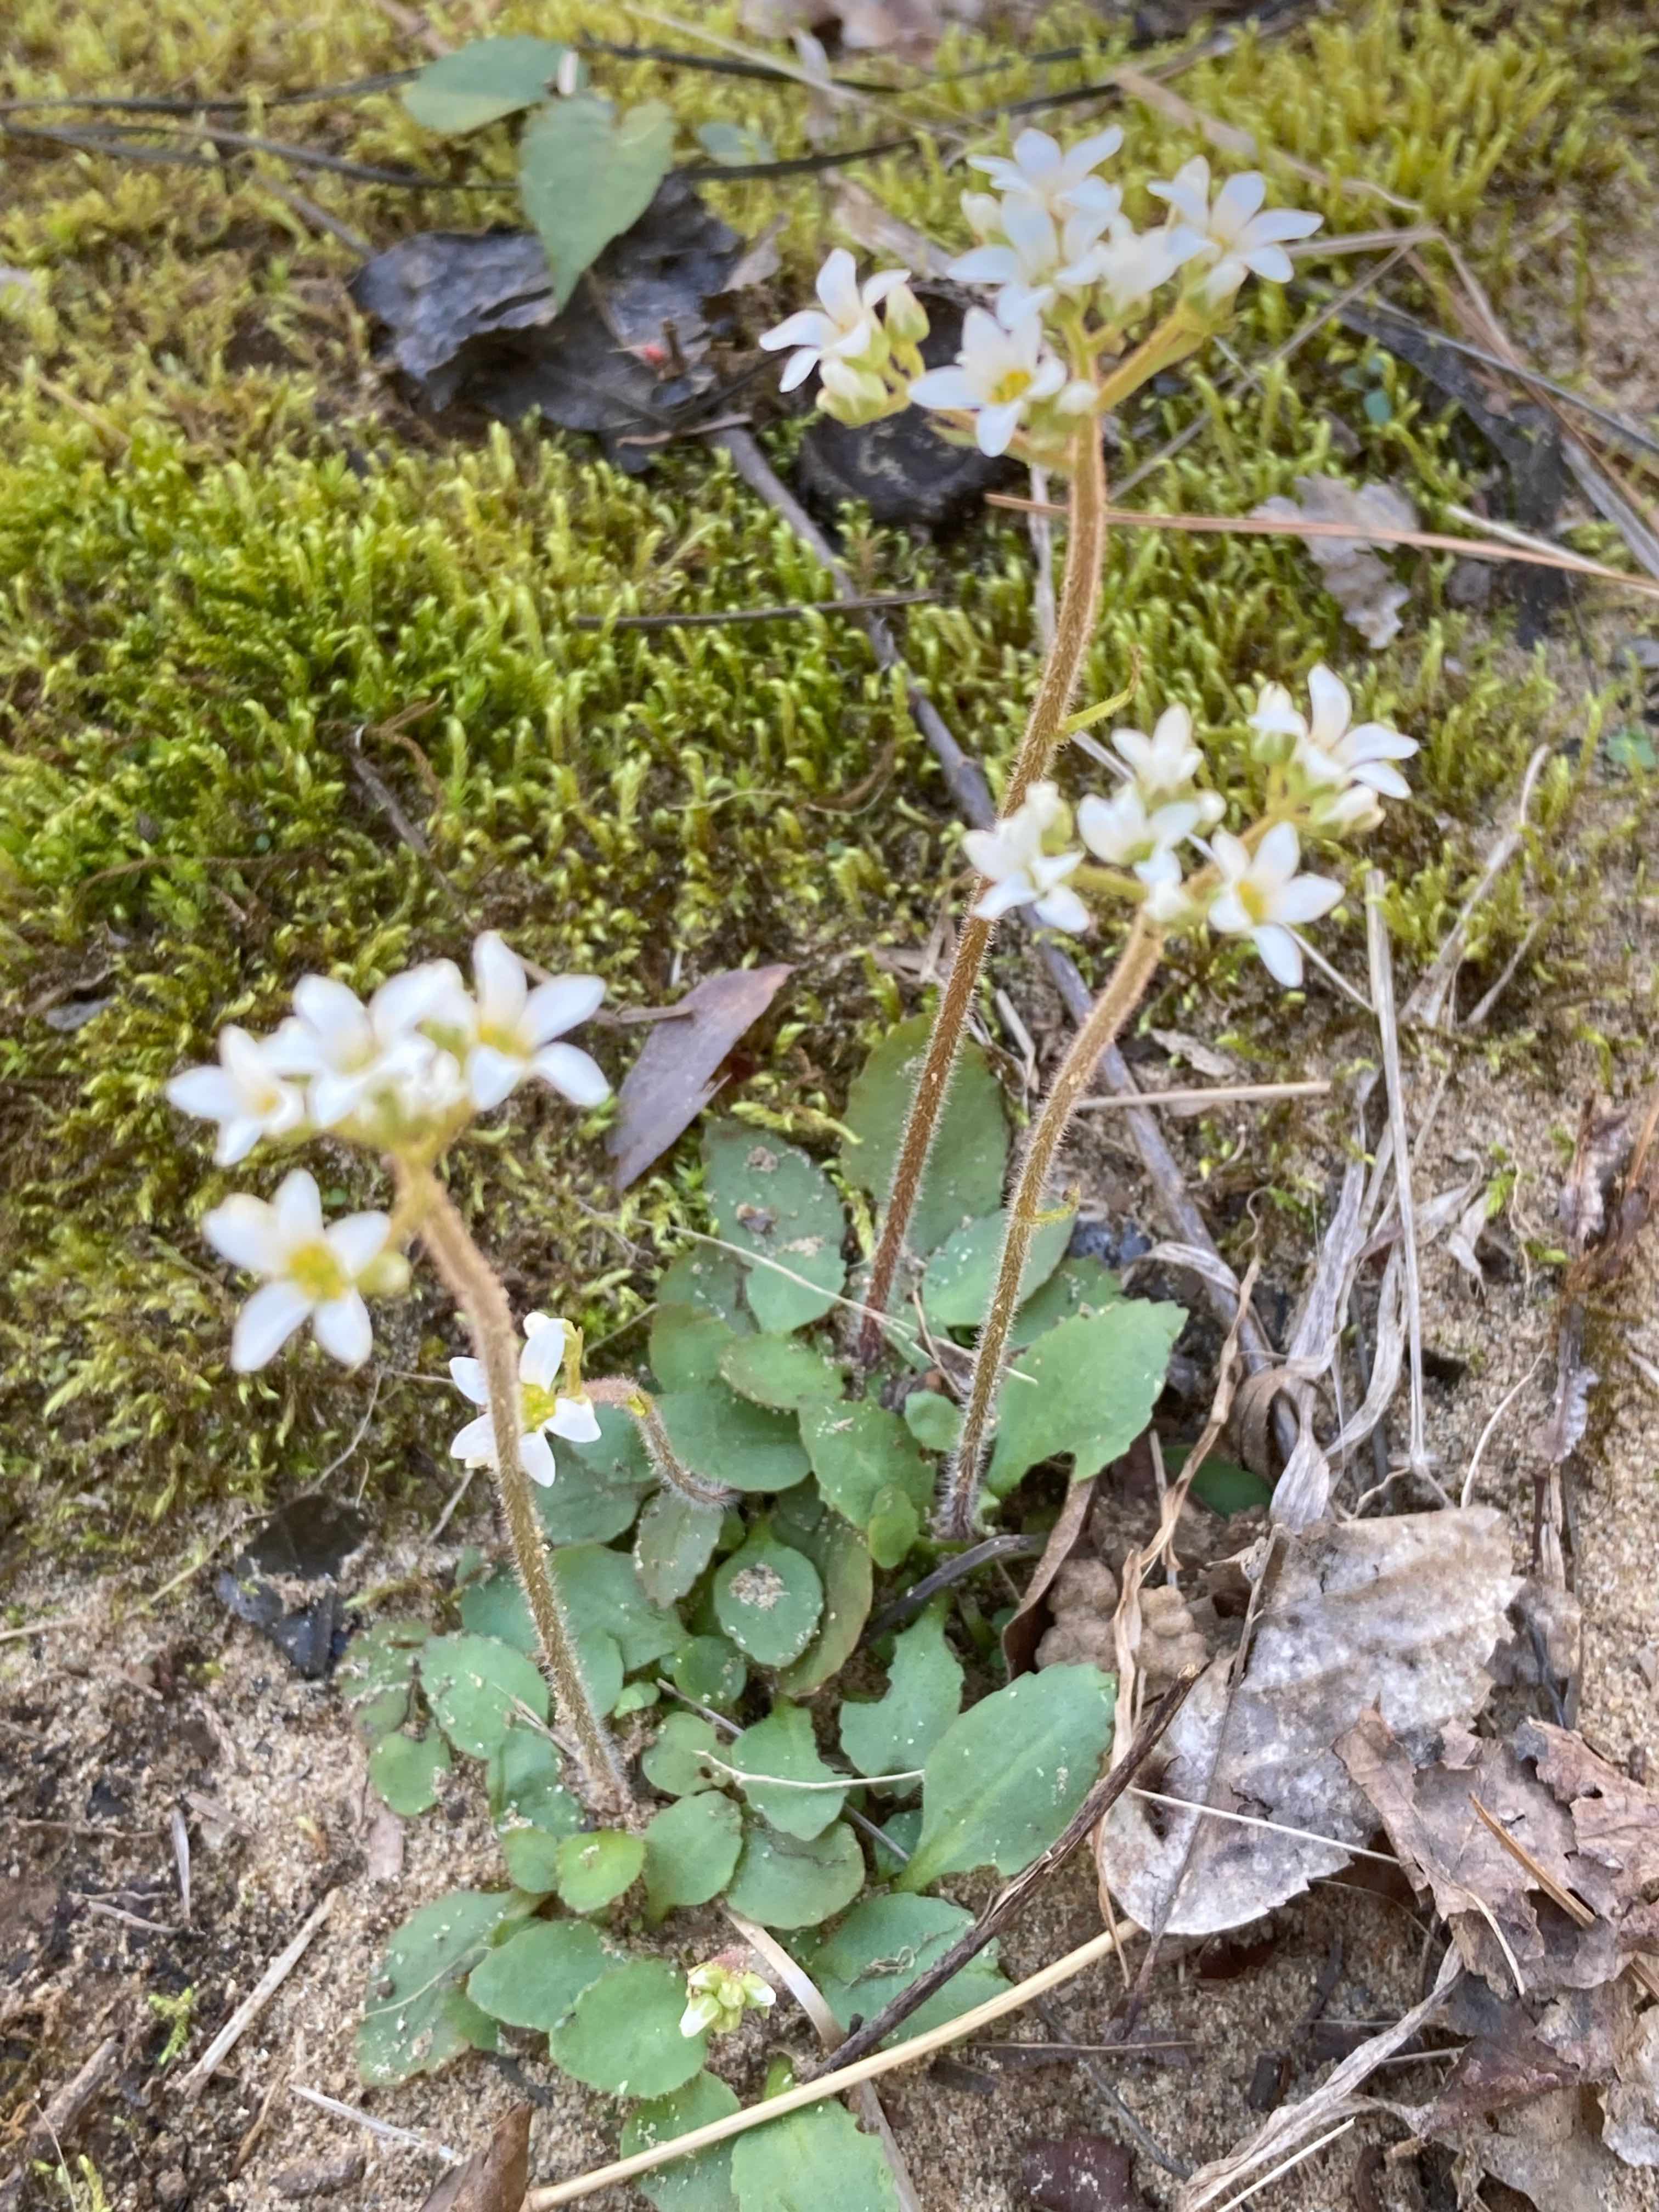 The Scientific Name is Micranthes virginiensis [= Saxifraga virginiensis]. You will likely hear them called Early Saxifrage. This picture shows the  The one foot tall flowering stem (peduncle) is thick and is covered with sticky hairs. of Micranthes virginiensis [= Saxifraga virginiensis]